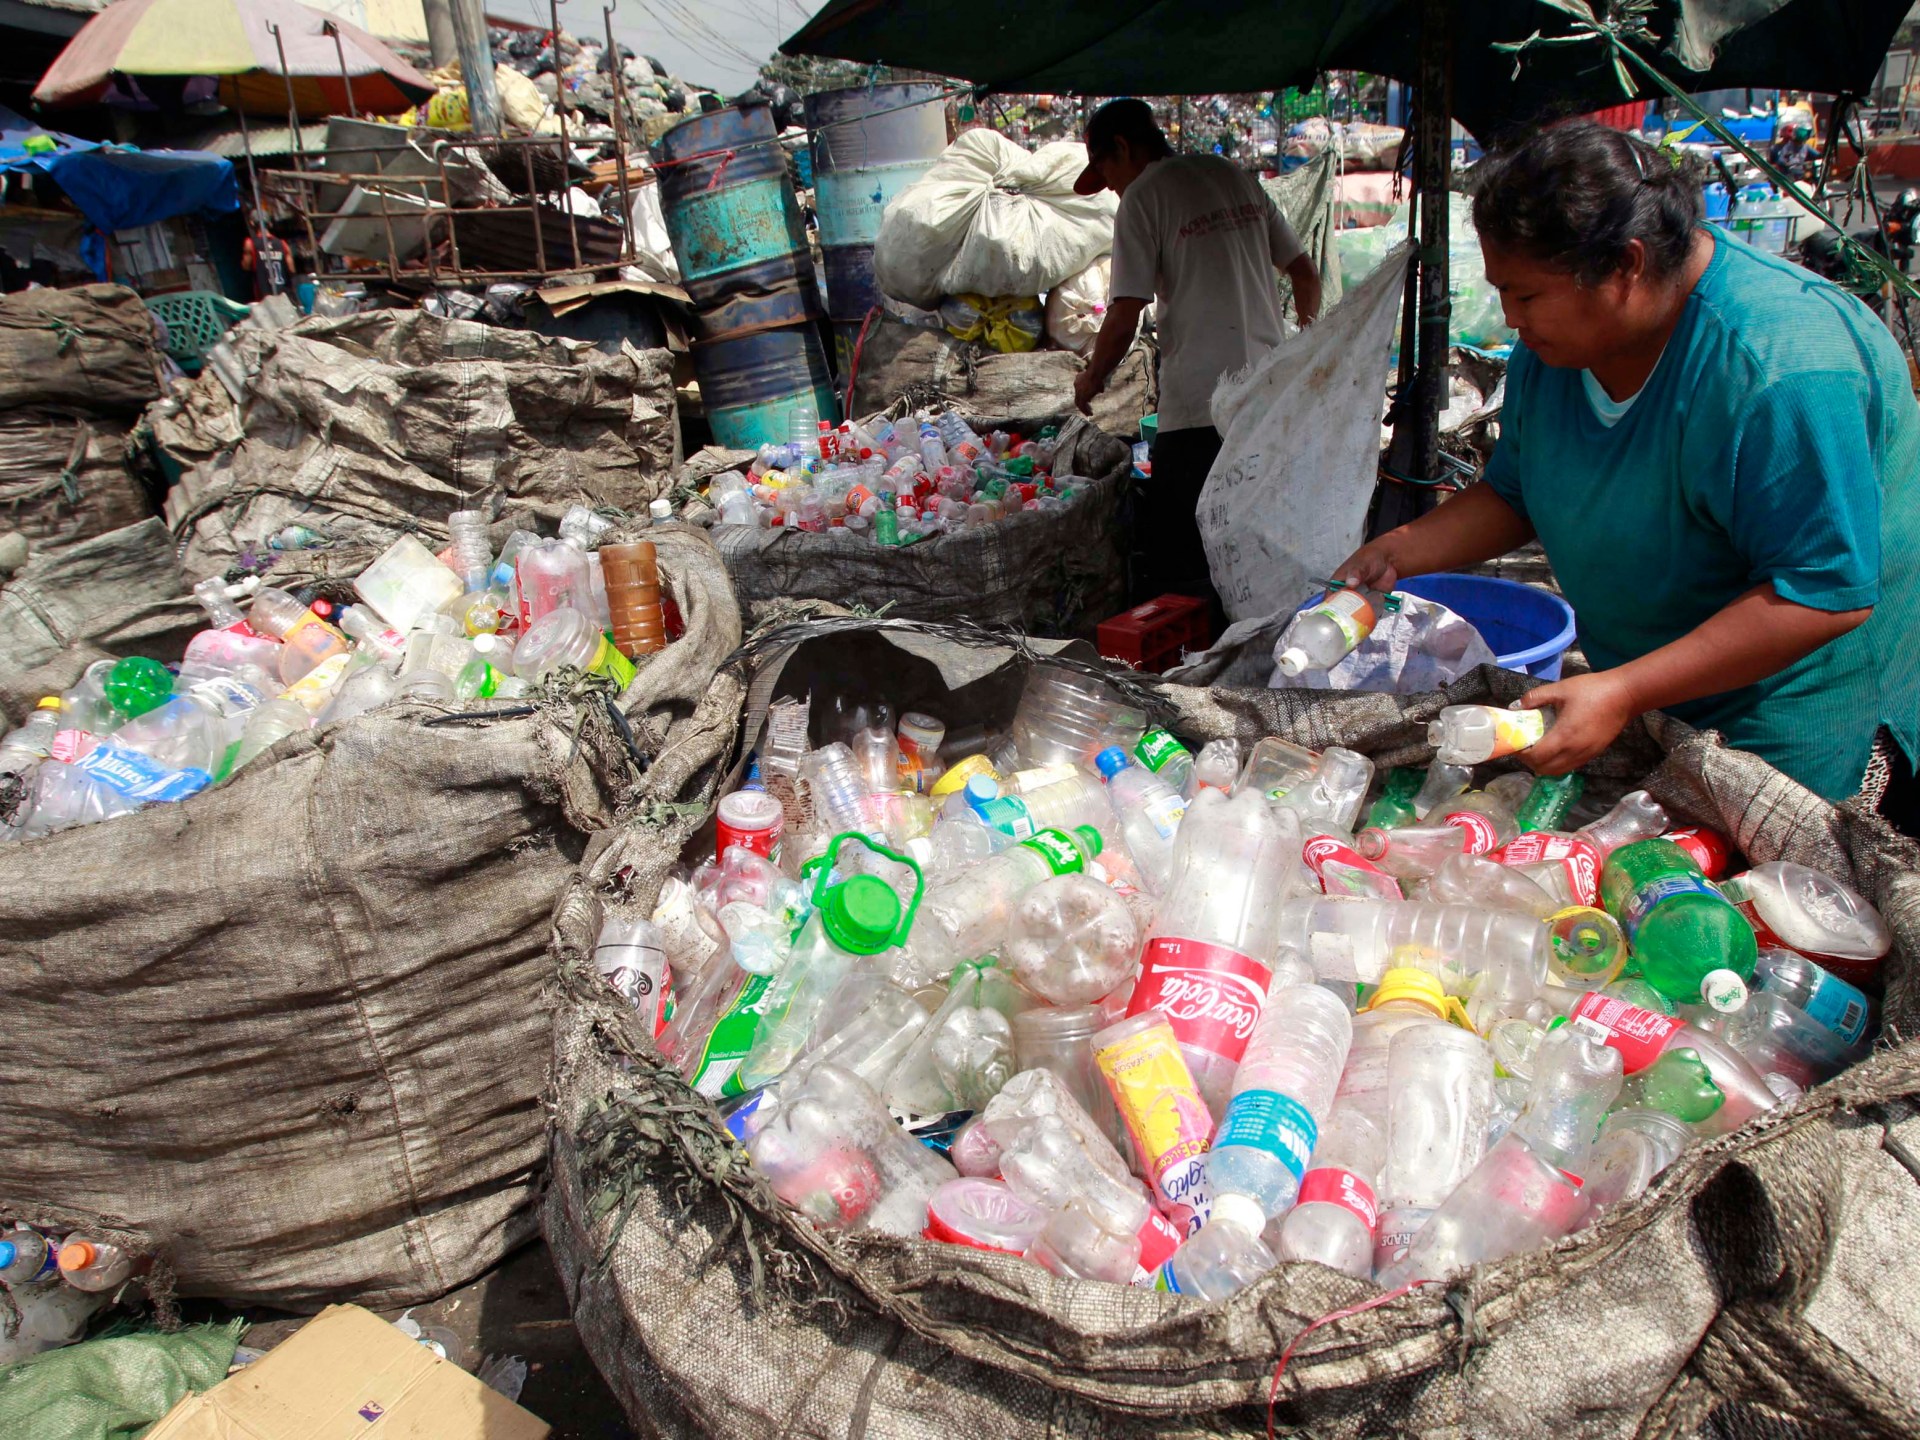 A treaty to end the age of plastic | Climate Crisis